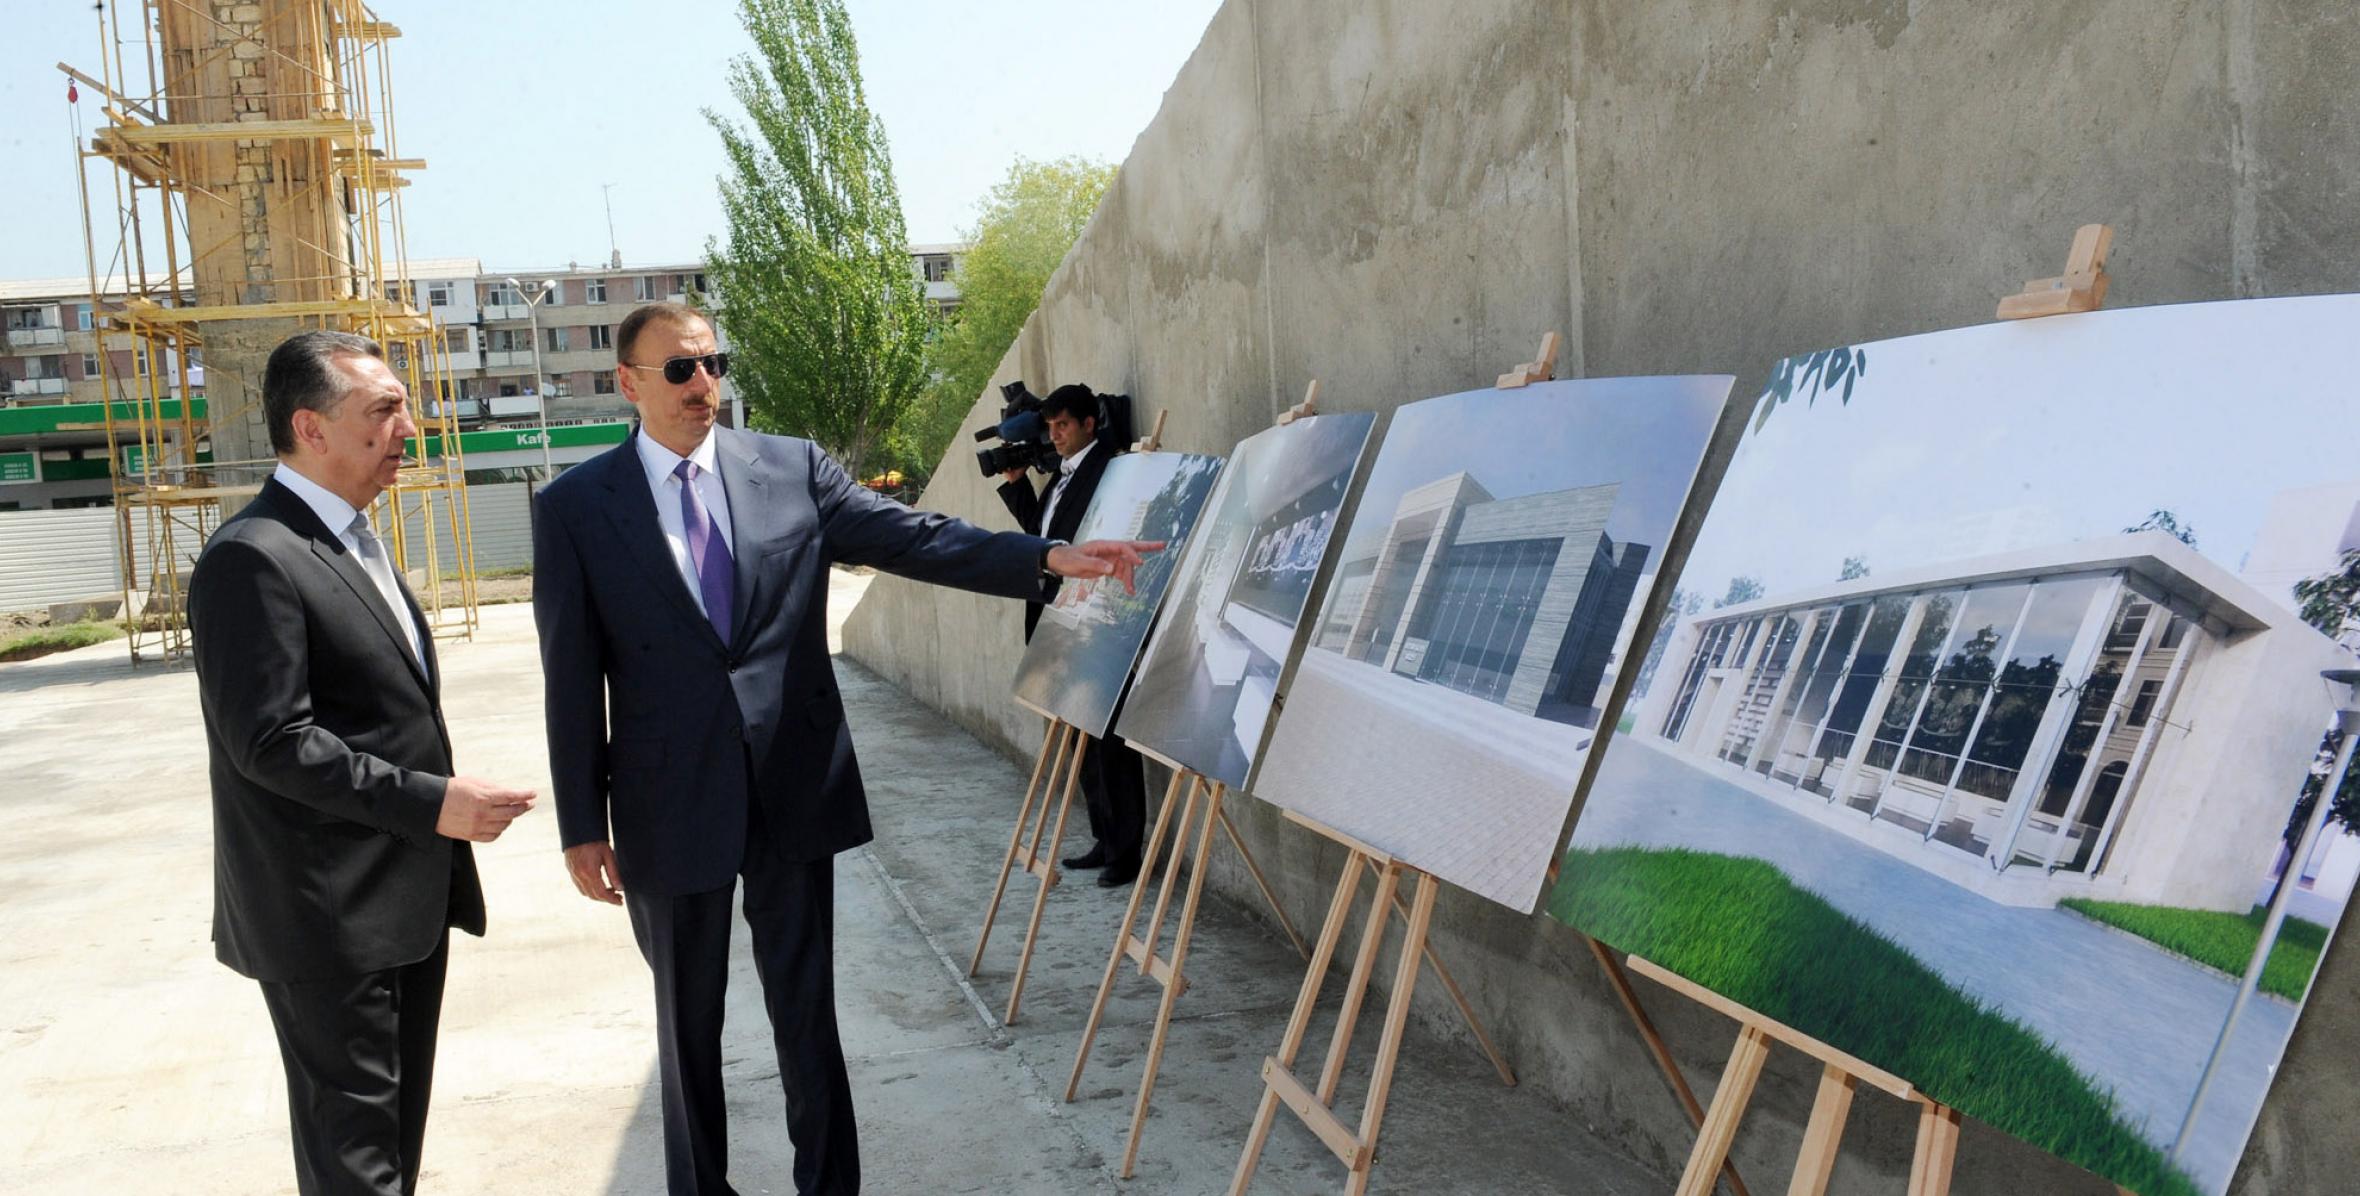 Ilham Aliyev reviewed the progress of reconstruction and landscaping work at the Heydar Aliyev Park